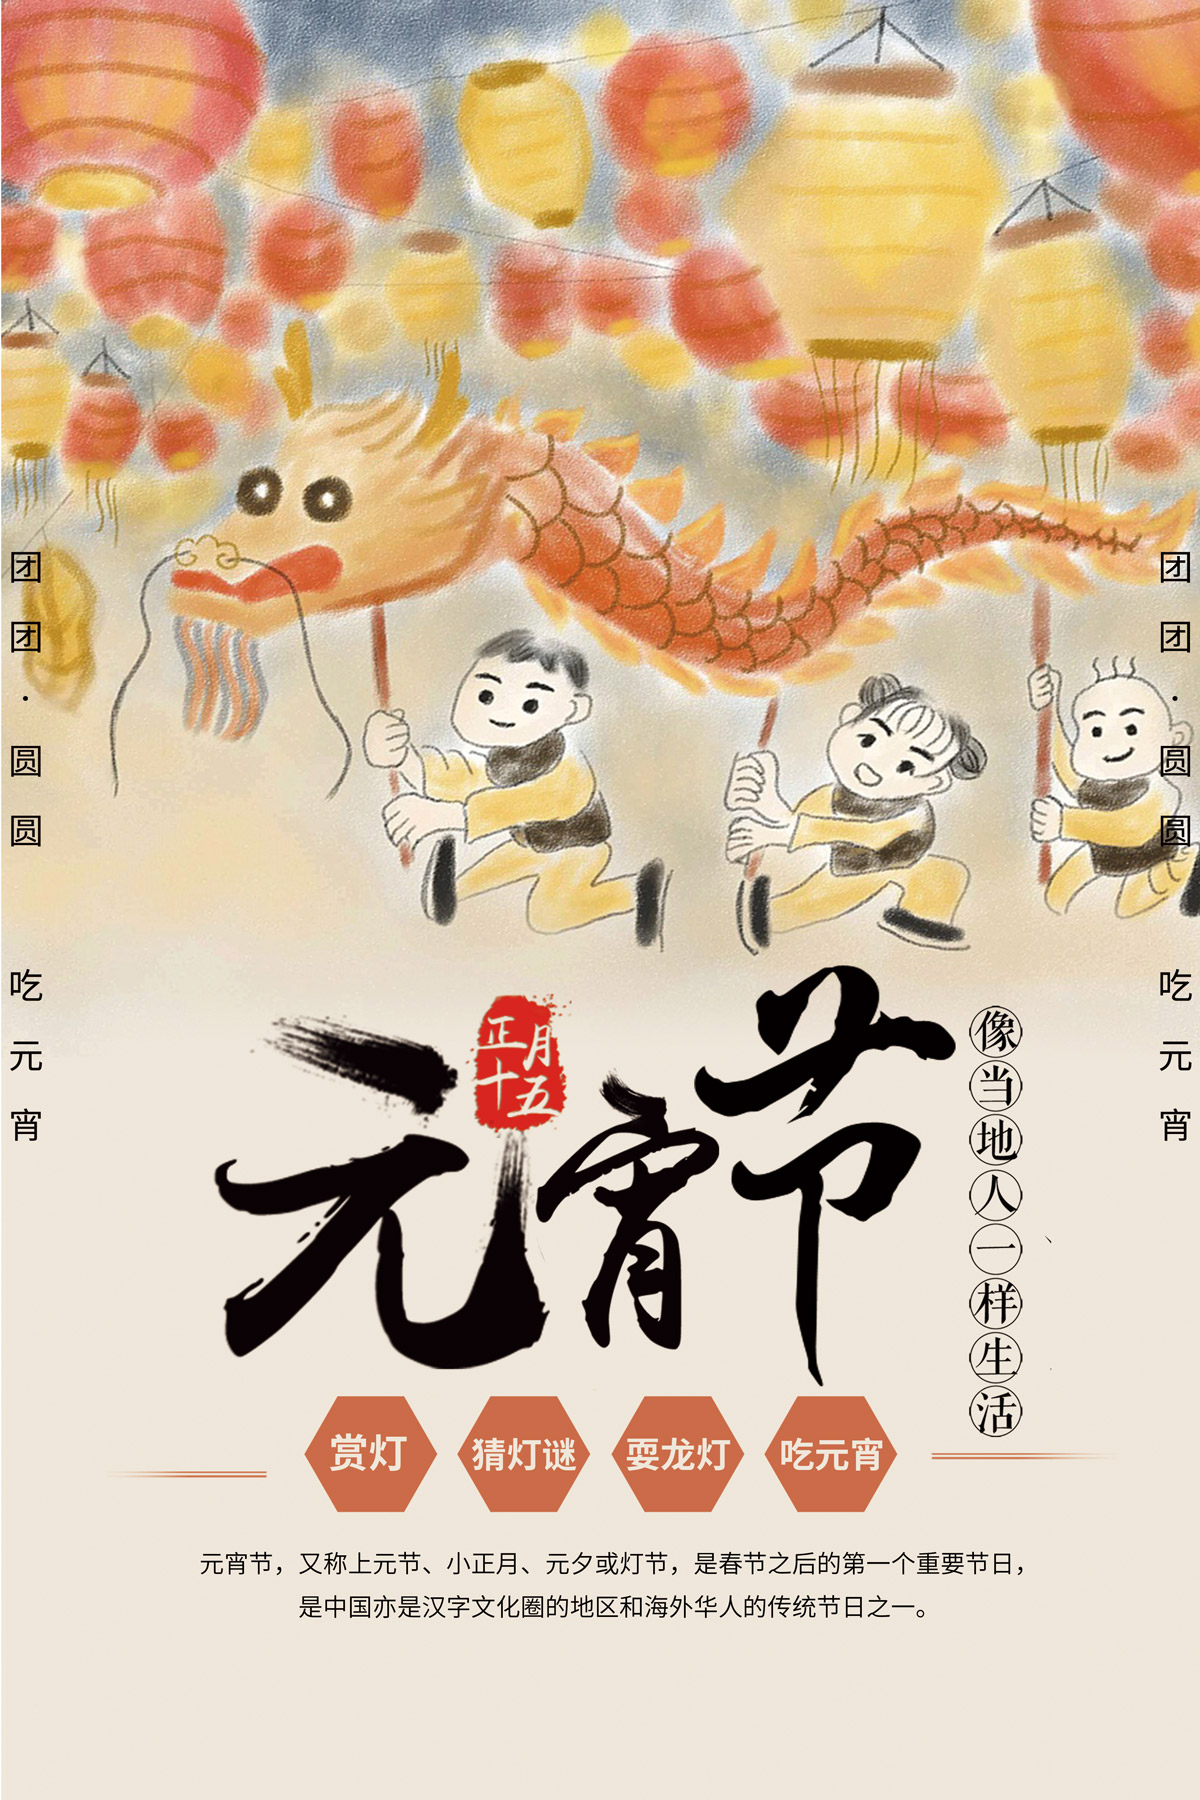 Happy lantern festival in China - PSD File Free Download